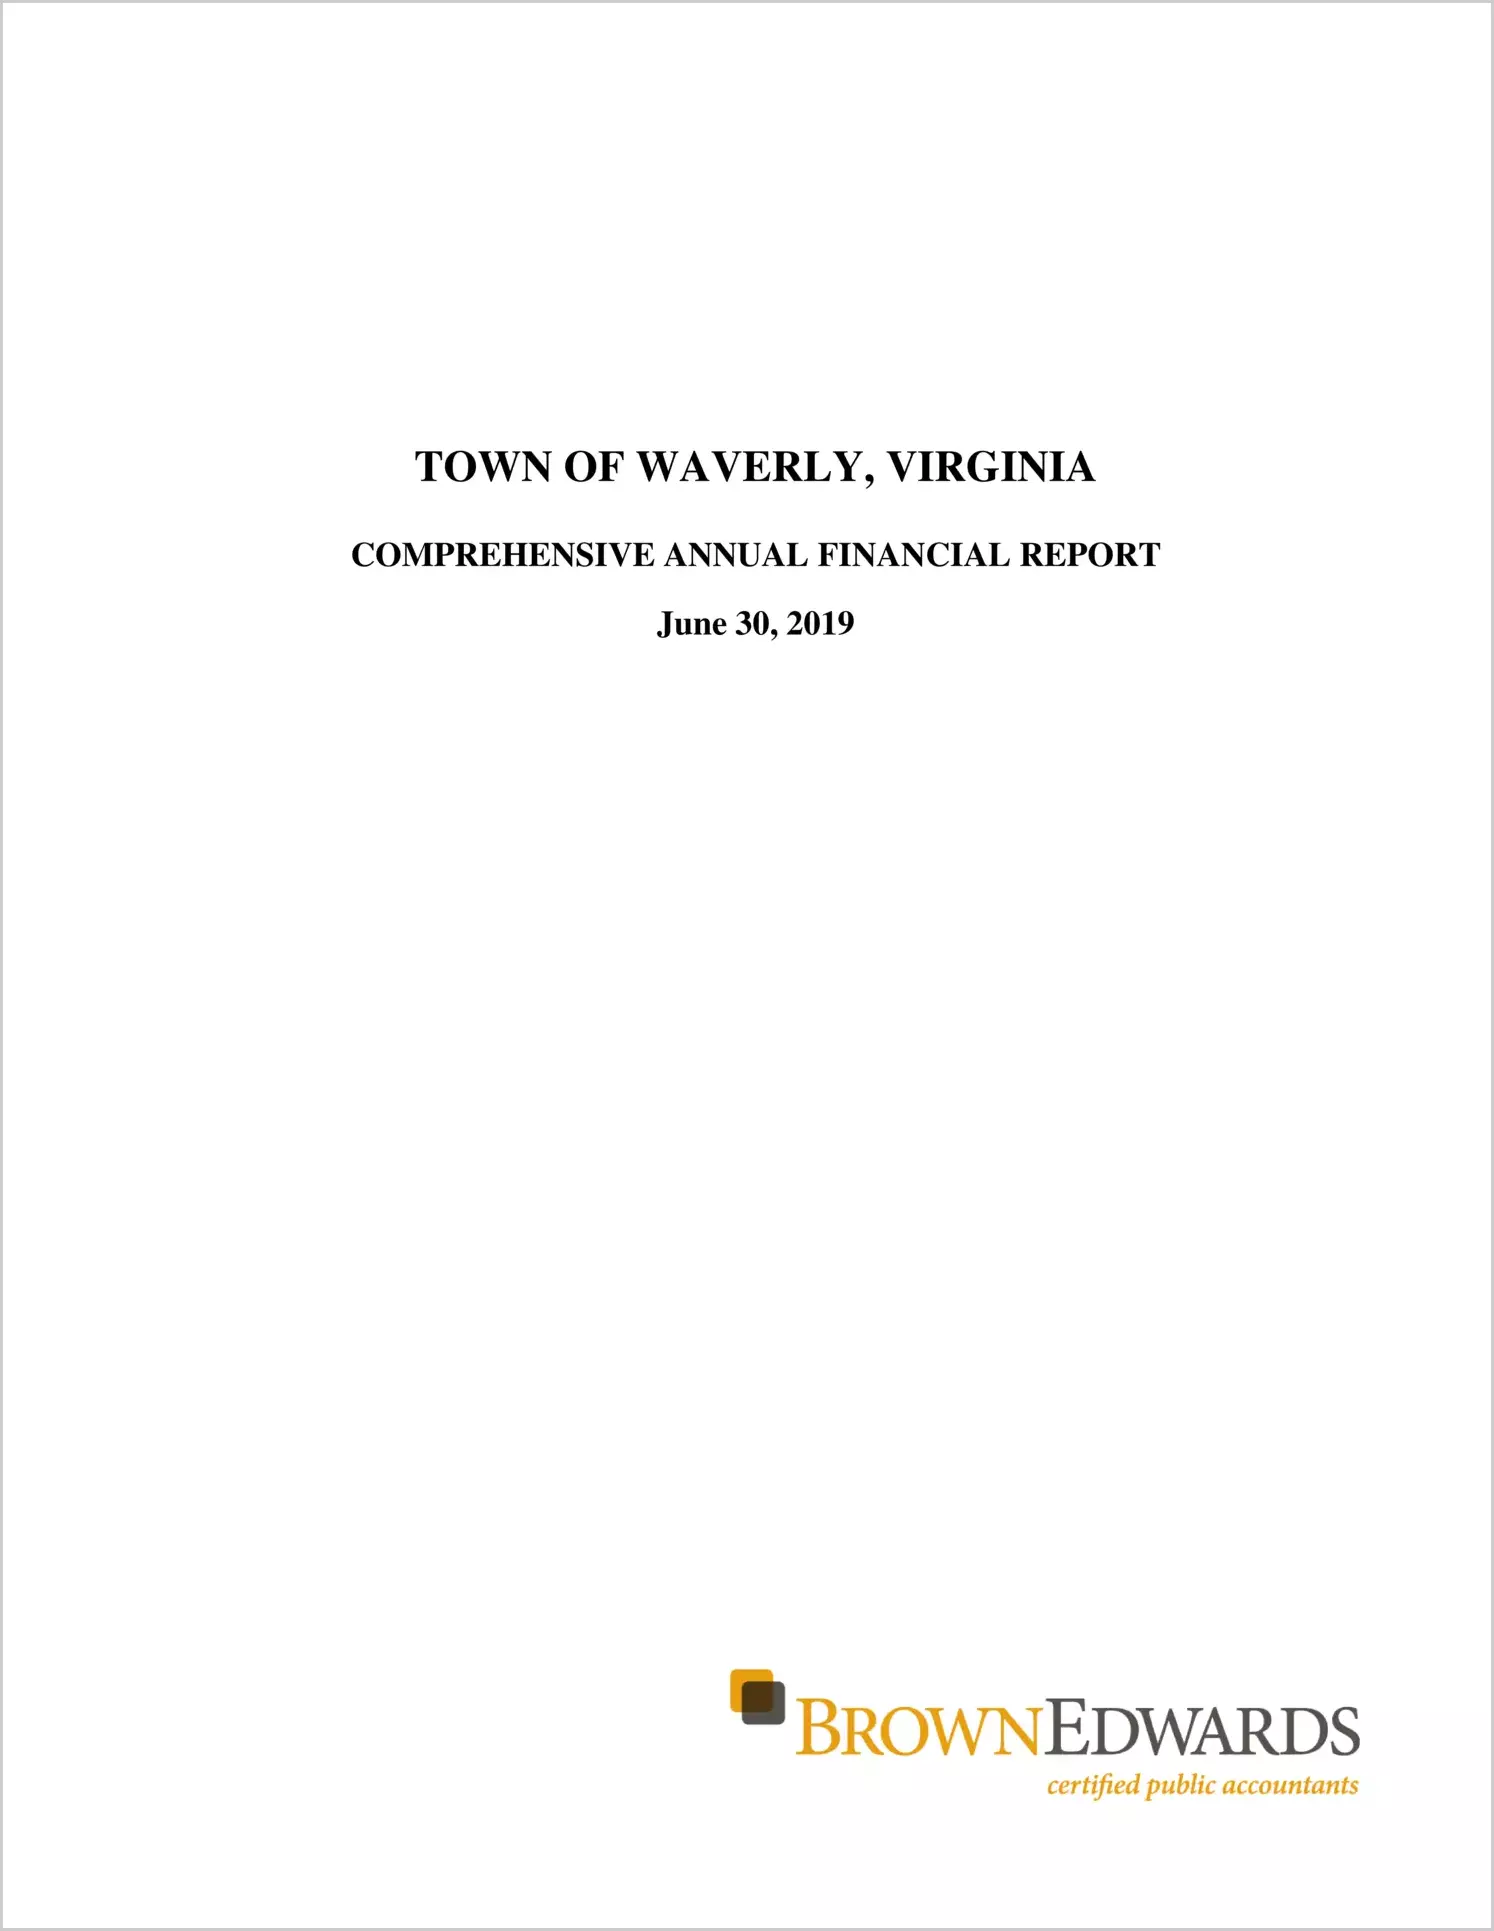 2019 Annual Financial Report for Town of Waverly